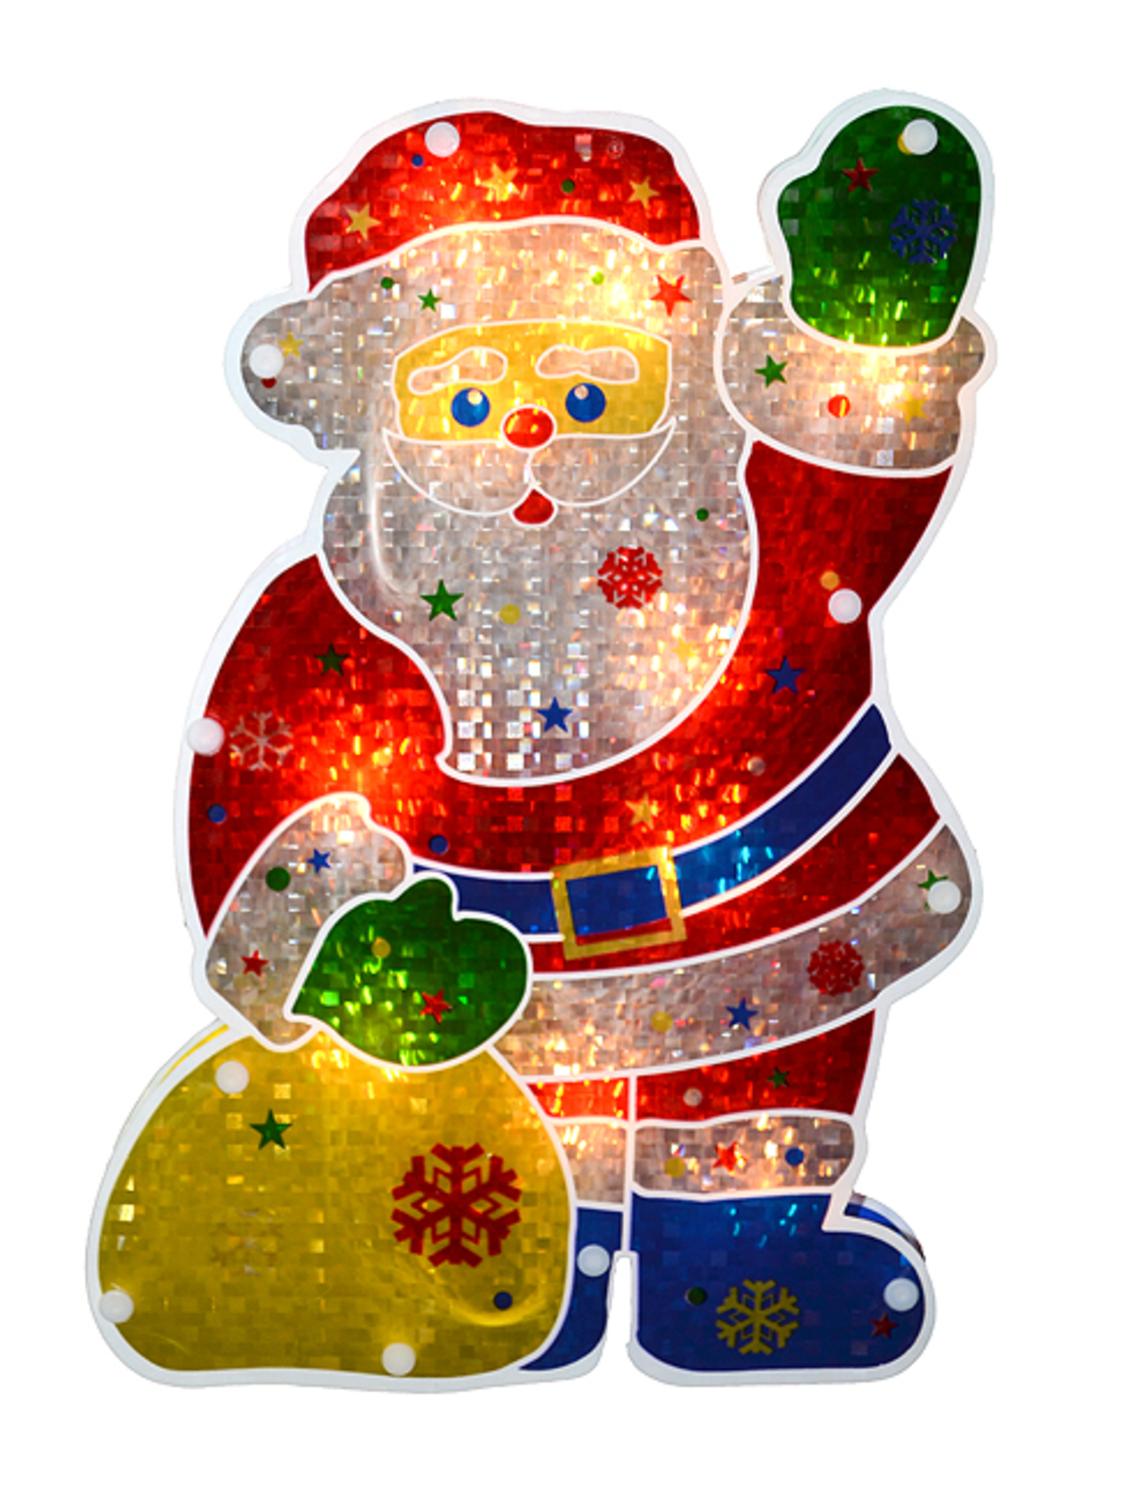 13" Lighted Holographic Santa Claus Christmas Window Silhouette